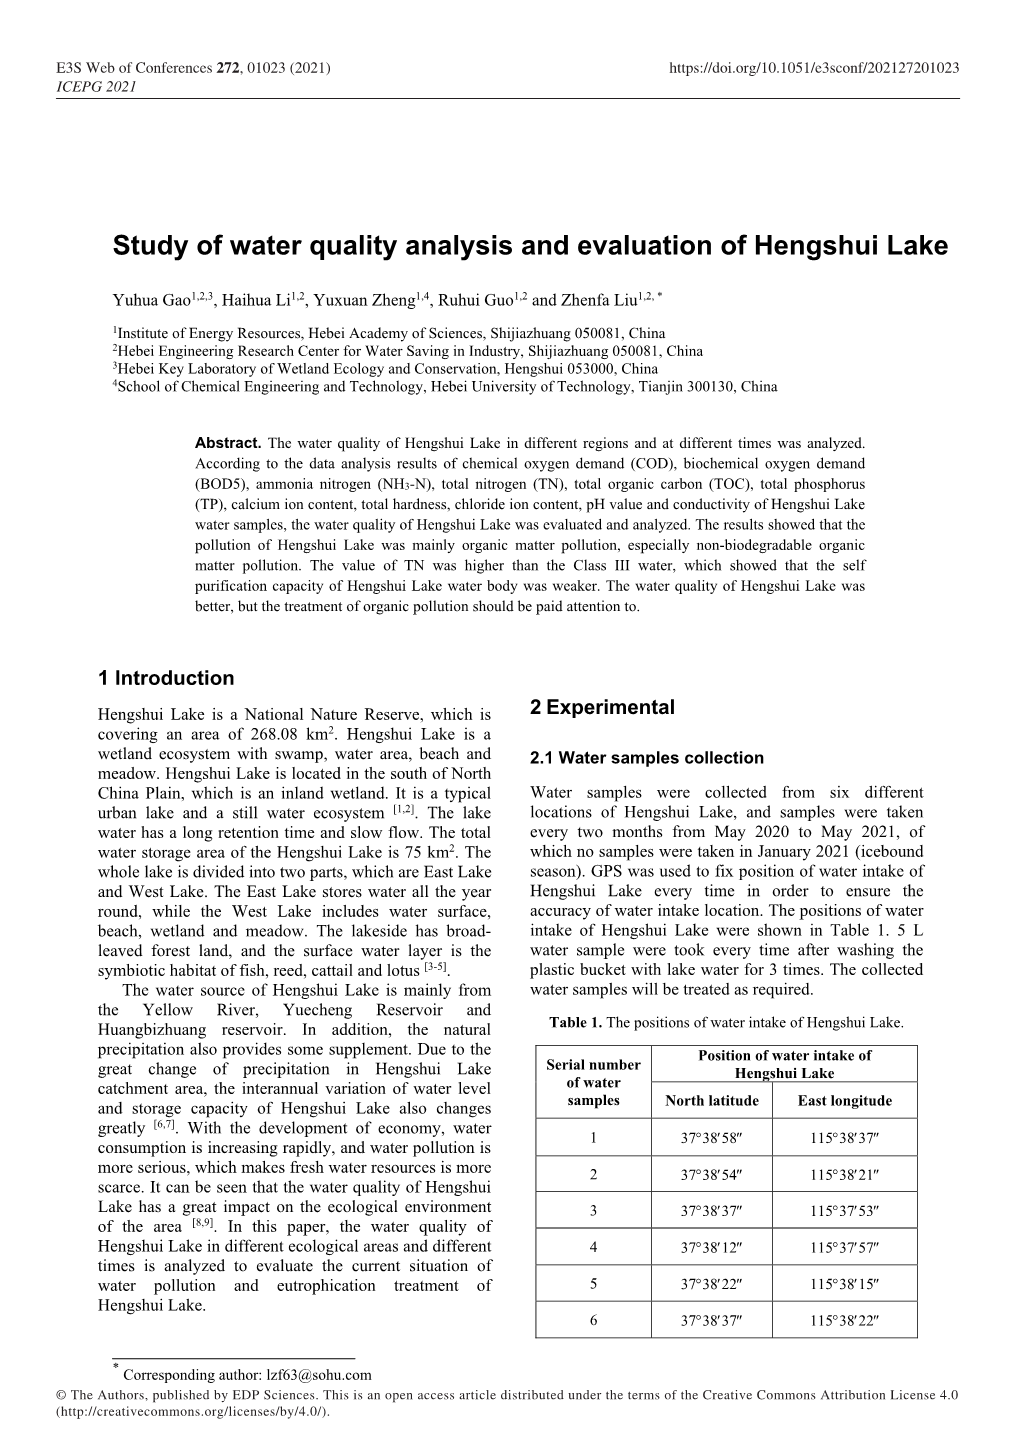 Study of Water Quality Analysis and Evaluation of Hengshui Lake